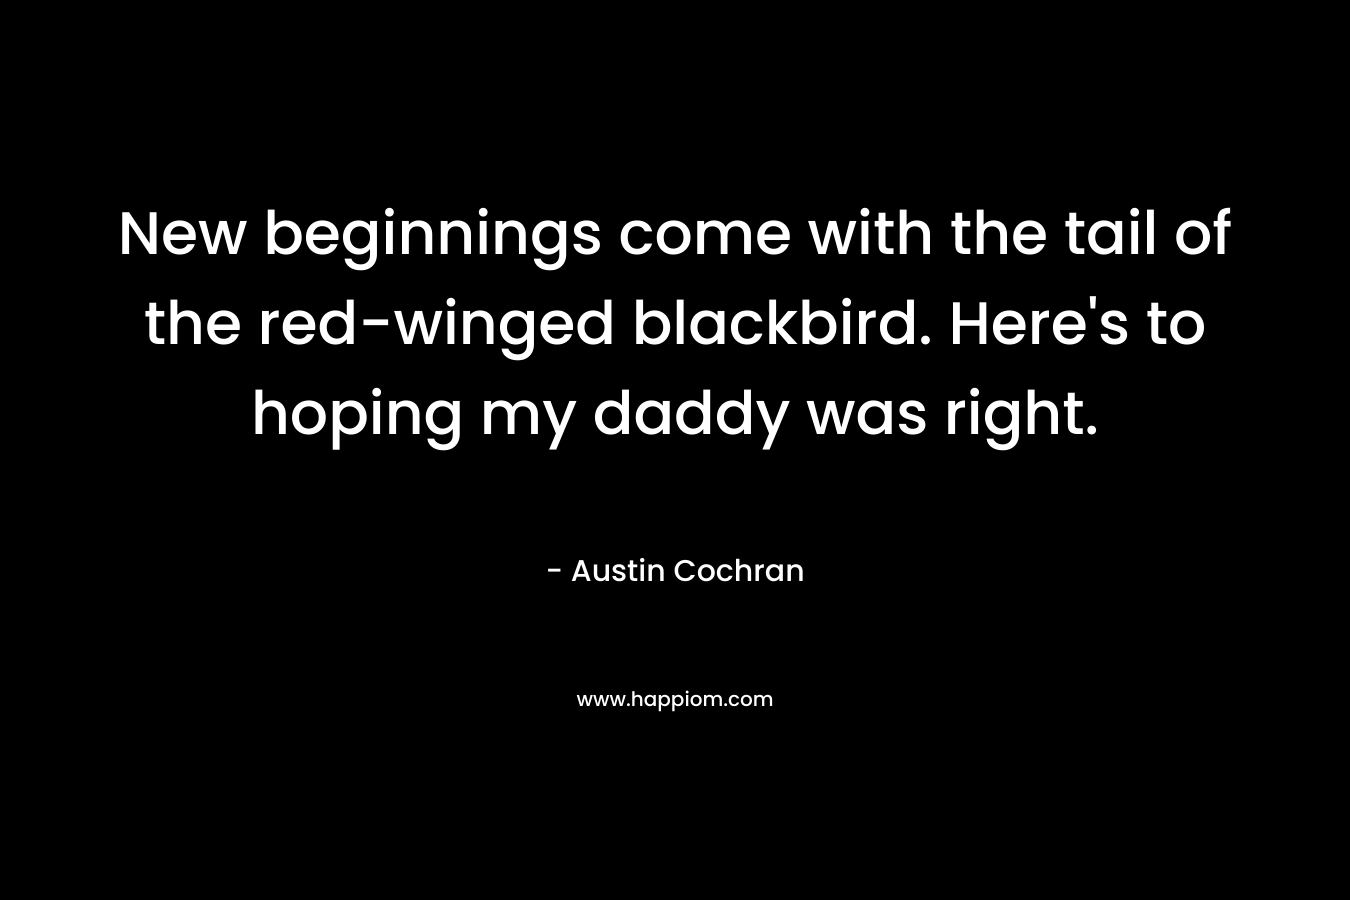 New beginnings come with the tail of the red-winged blackbird. Here’s to hoping my daddy was right. – Austin Cochran